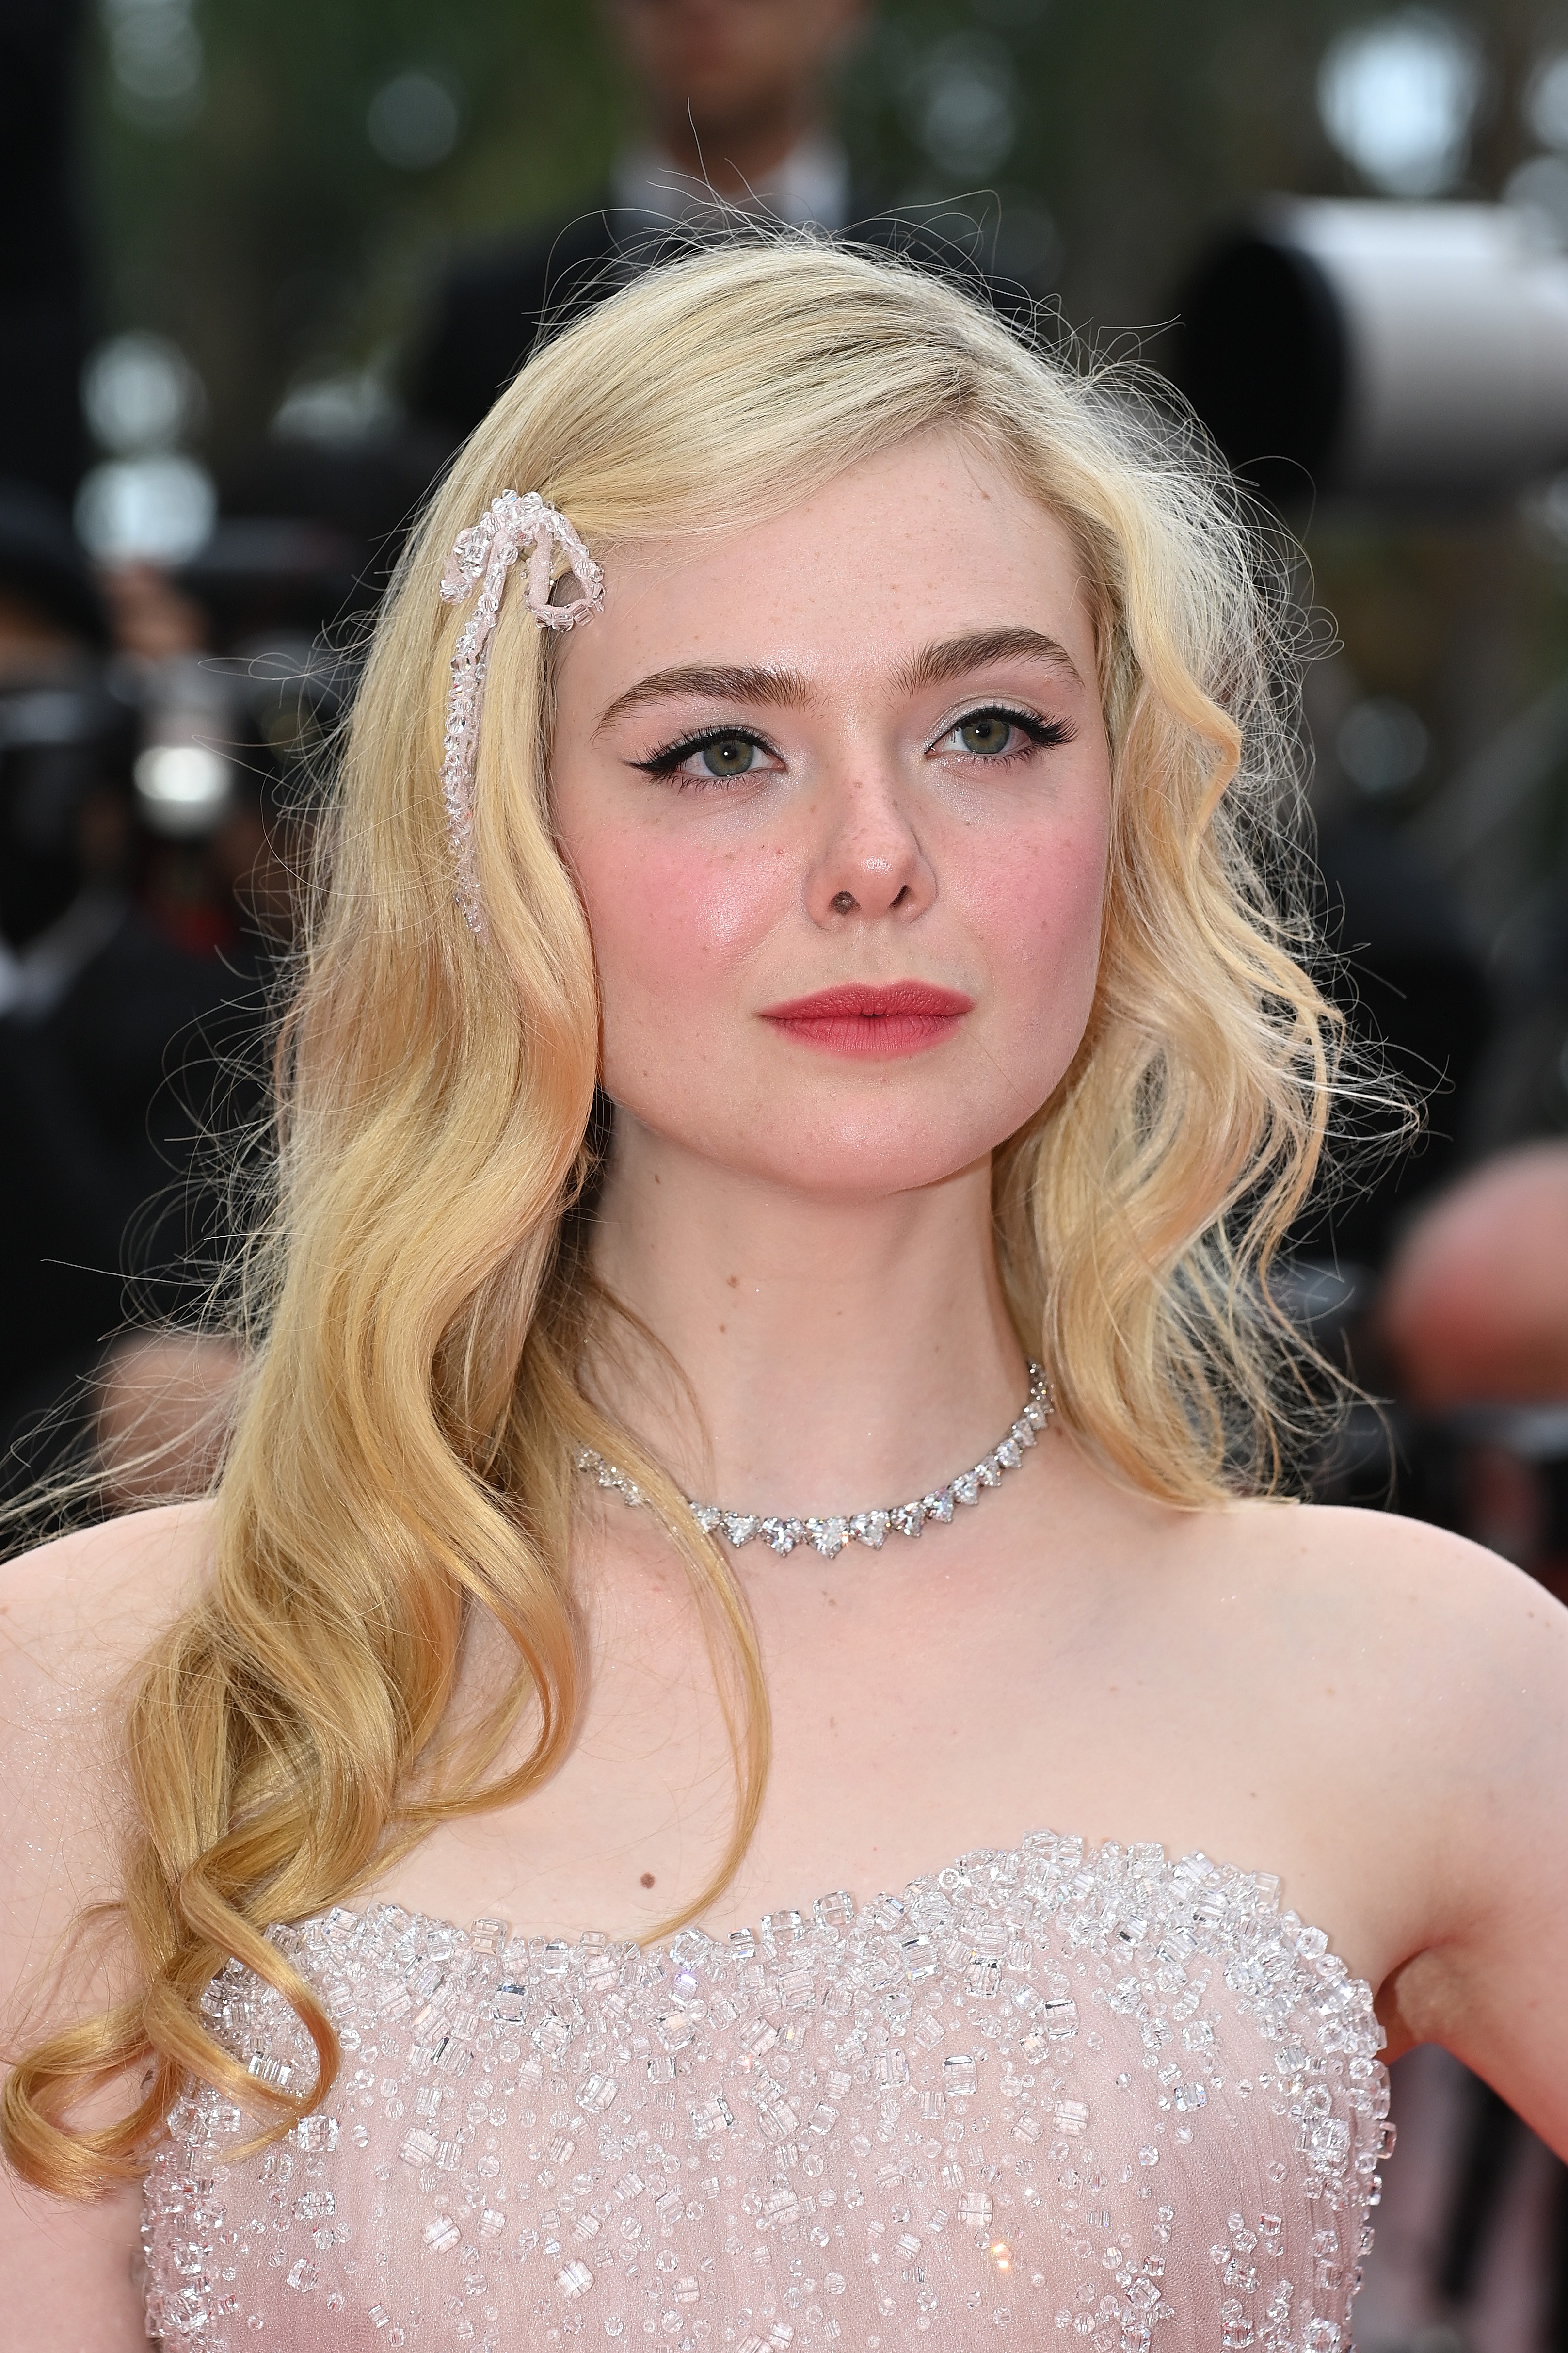 CANNES, FRANCE - MAY 18: Elle Fanning attends the screening of "Top Gun: Maverick" during the 75th annual Cannes film festival at Palais des Festivals on May 18, 2022 in Cannes, France. (Photo by Pascal Le Segretain/Getty Images) (Foto: Getty Images)